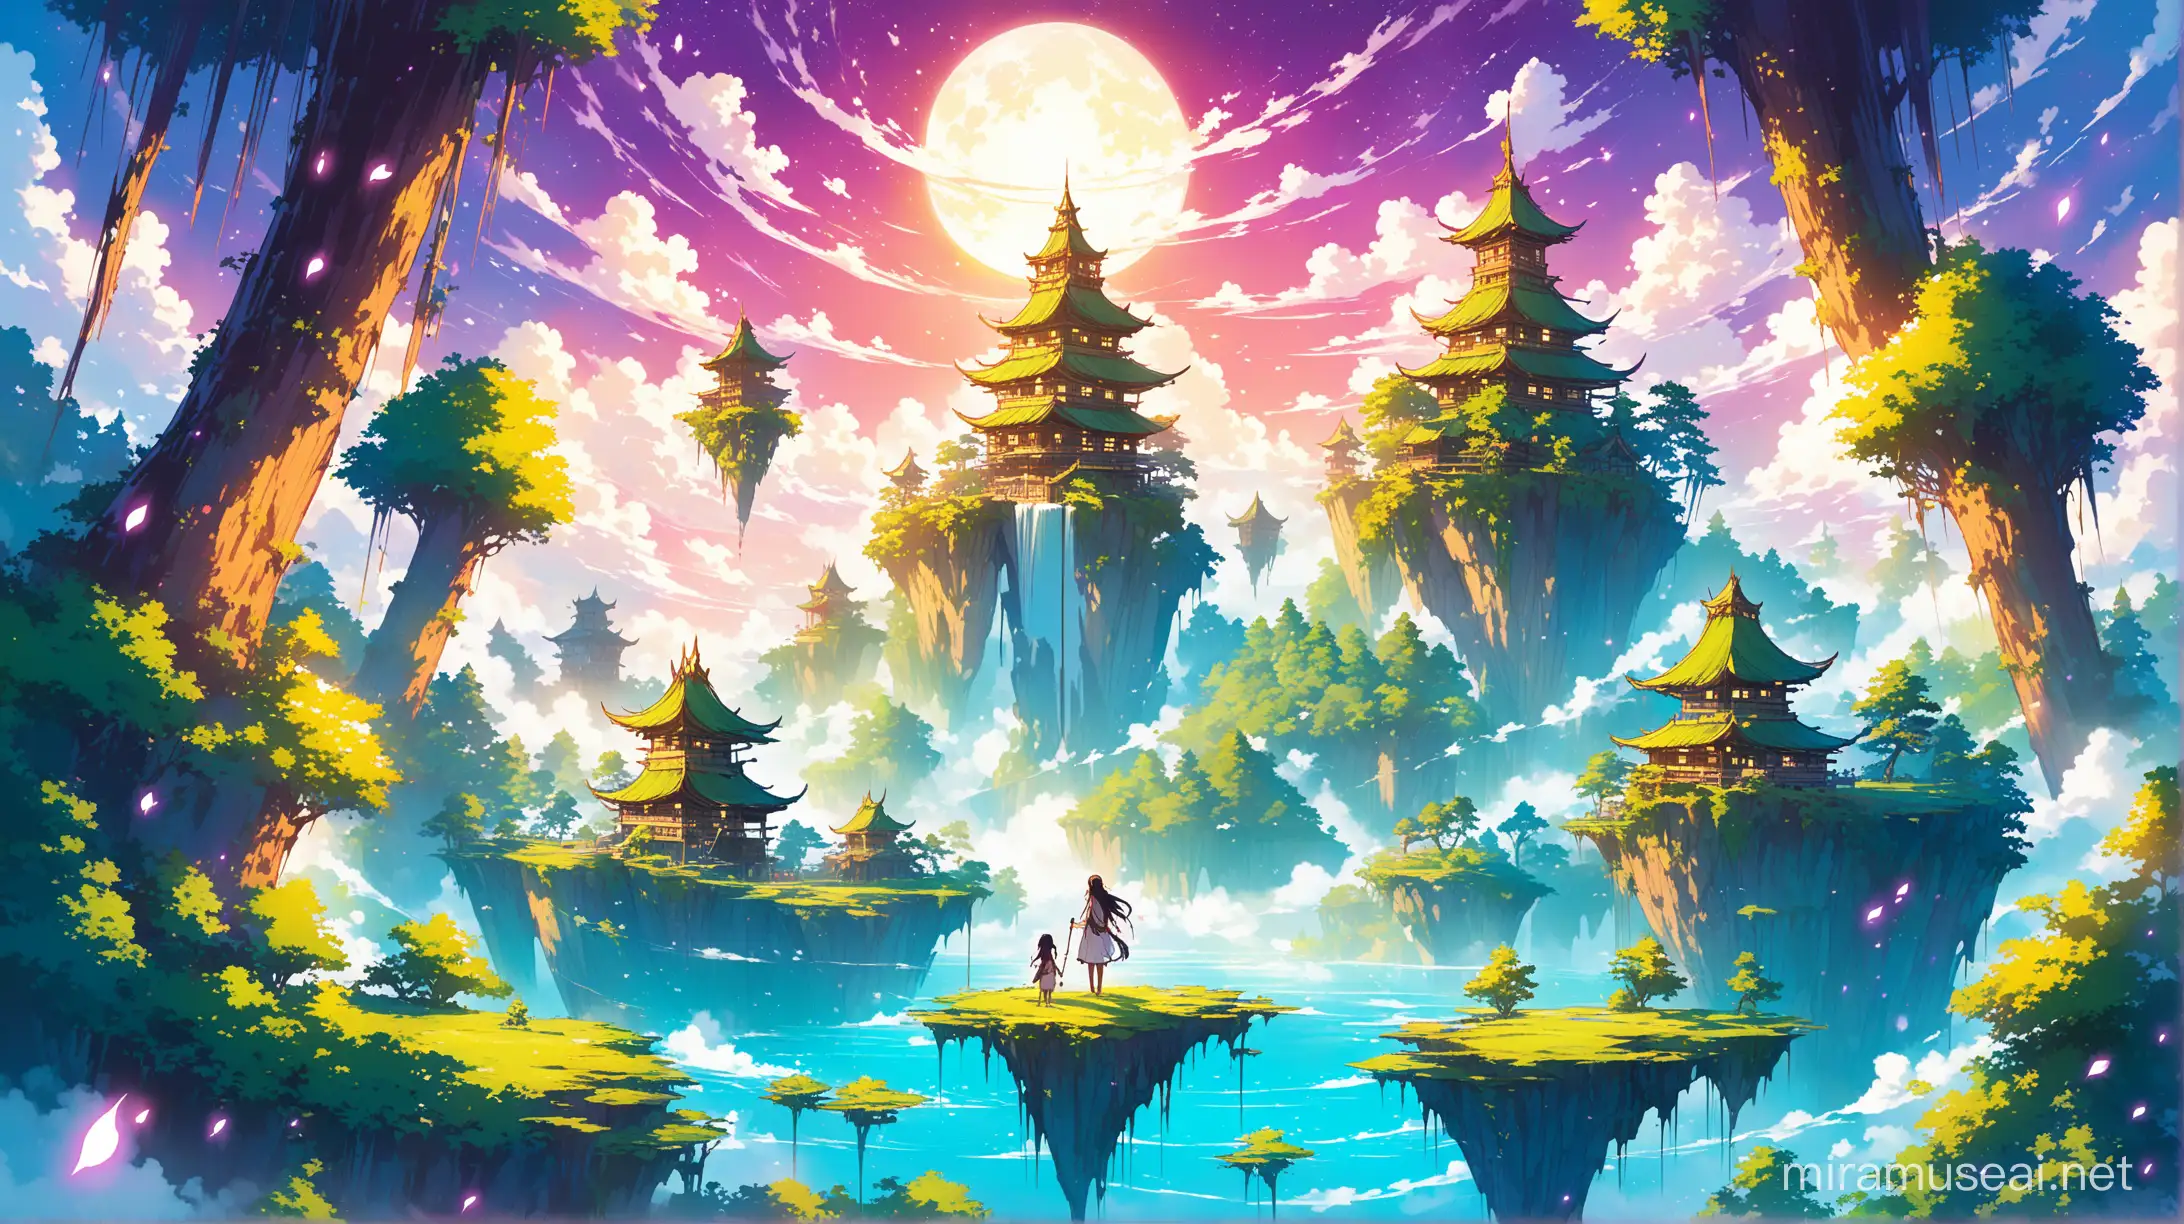 Fantasy Anime World with Floating Islands and Enchanted Forests